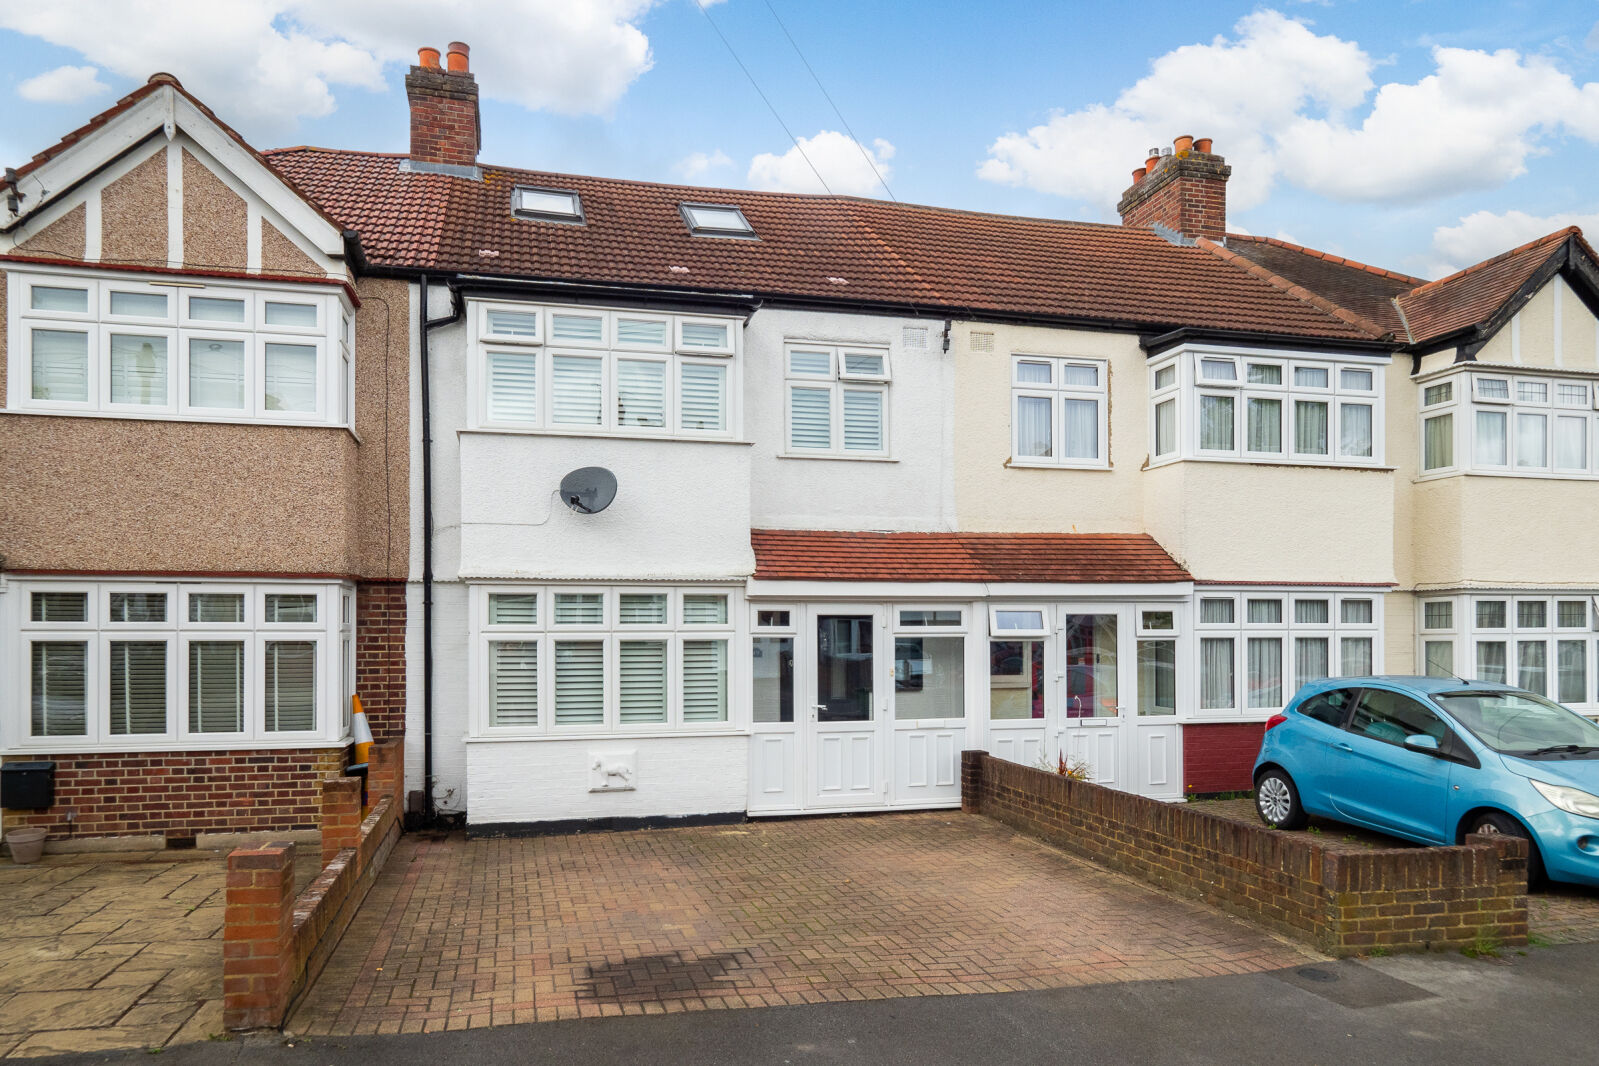 5 bedroom mid terraced house for sale Matlock Crescent, Cheam, SM3, main image